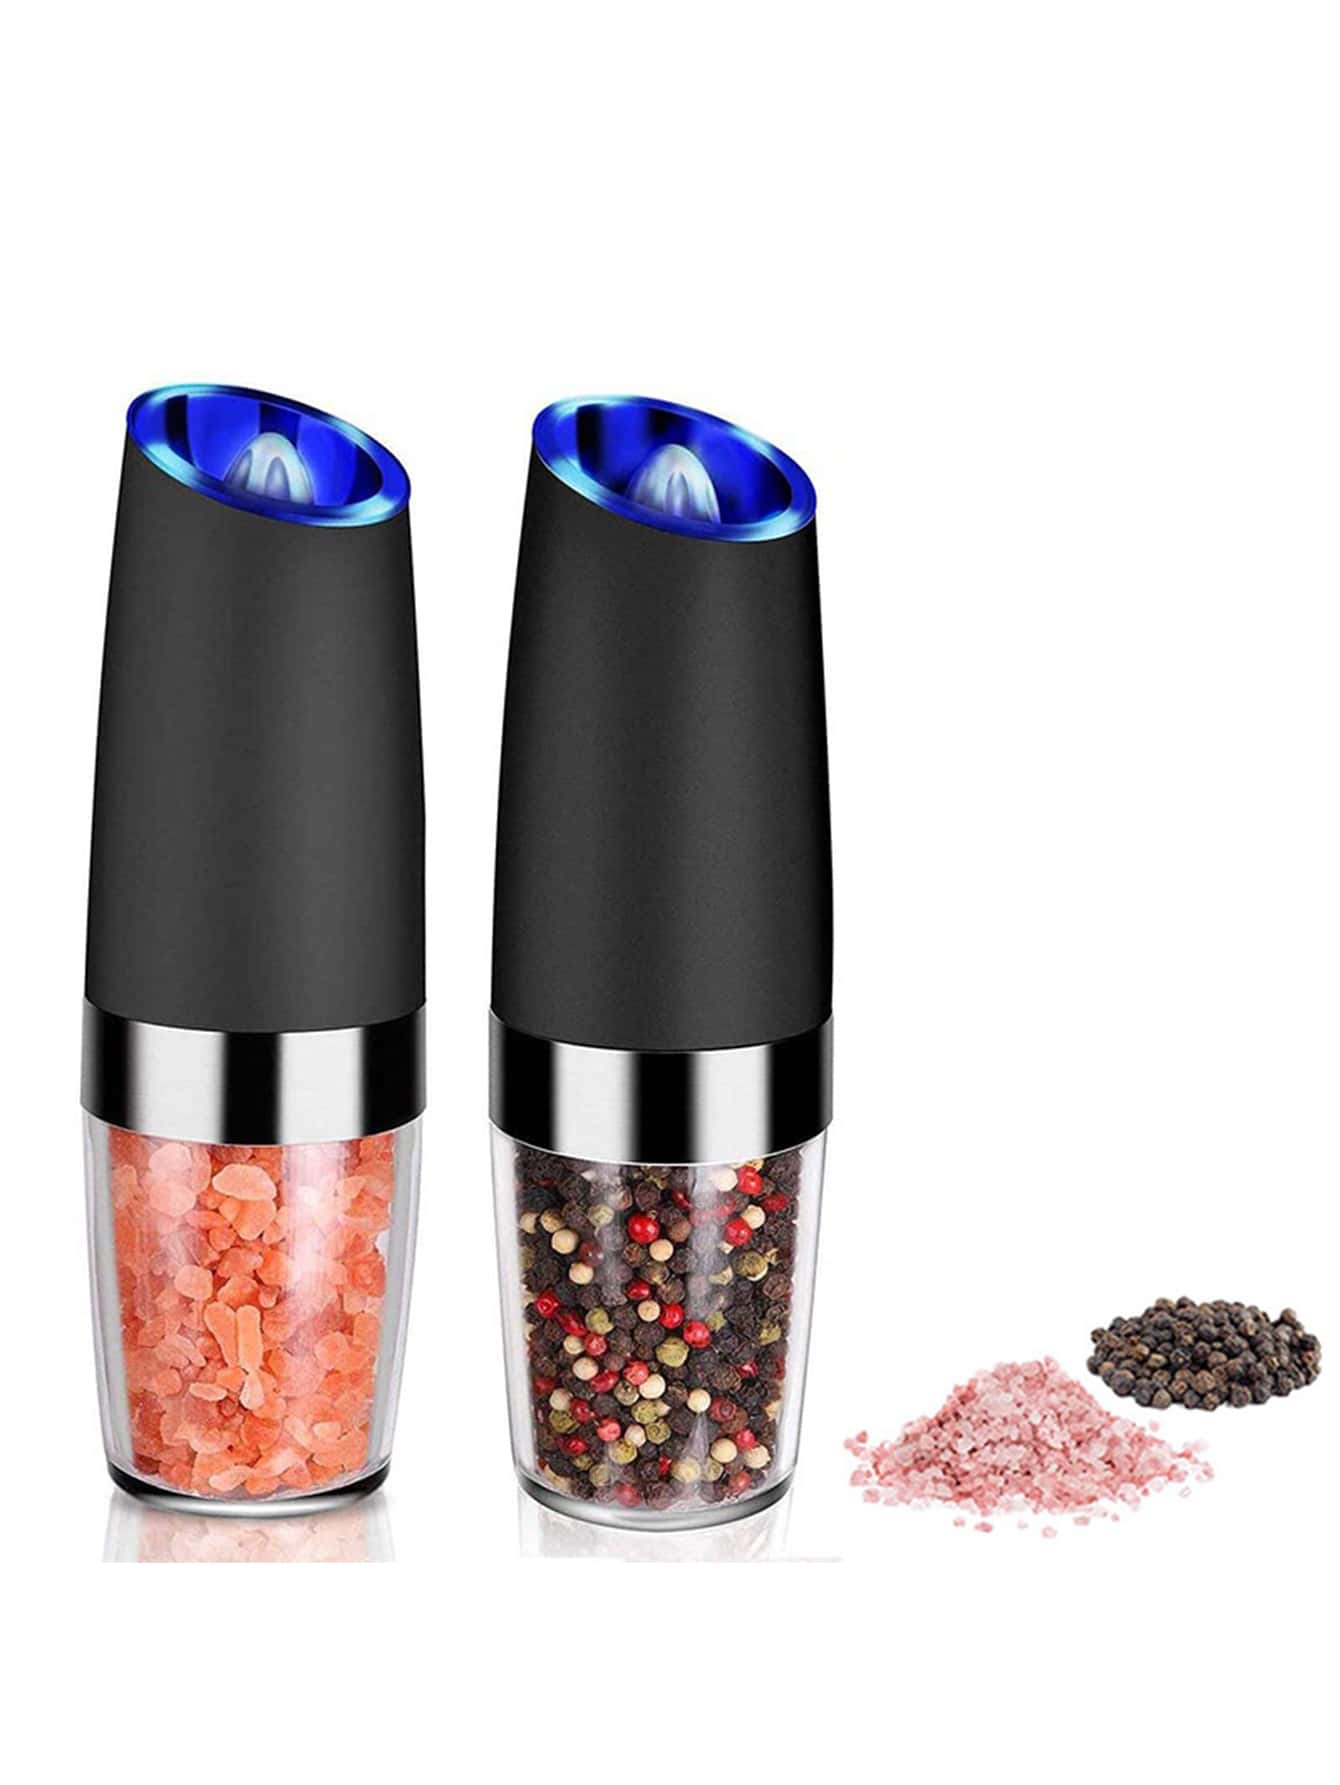 1pc Gravity Electric Salt & Pepper Mill Set, Automatic Pepper And Salt Grinder, Electric Grinding Machine, No Battery Required, With Blue Led Light, Adjustable Coarseness Electric Pepper Grinder, Refillable Salt And Pepper Shakers-Silver-4